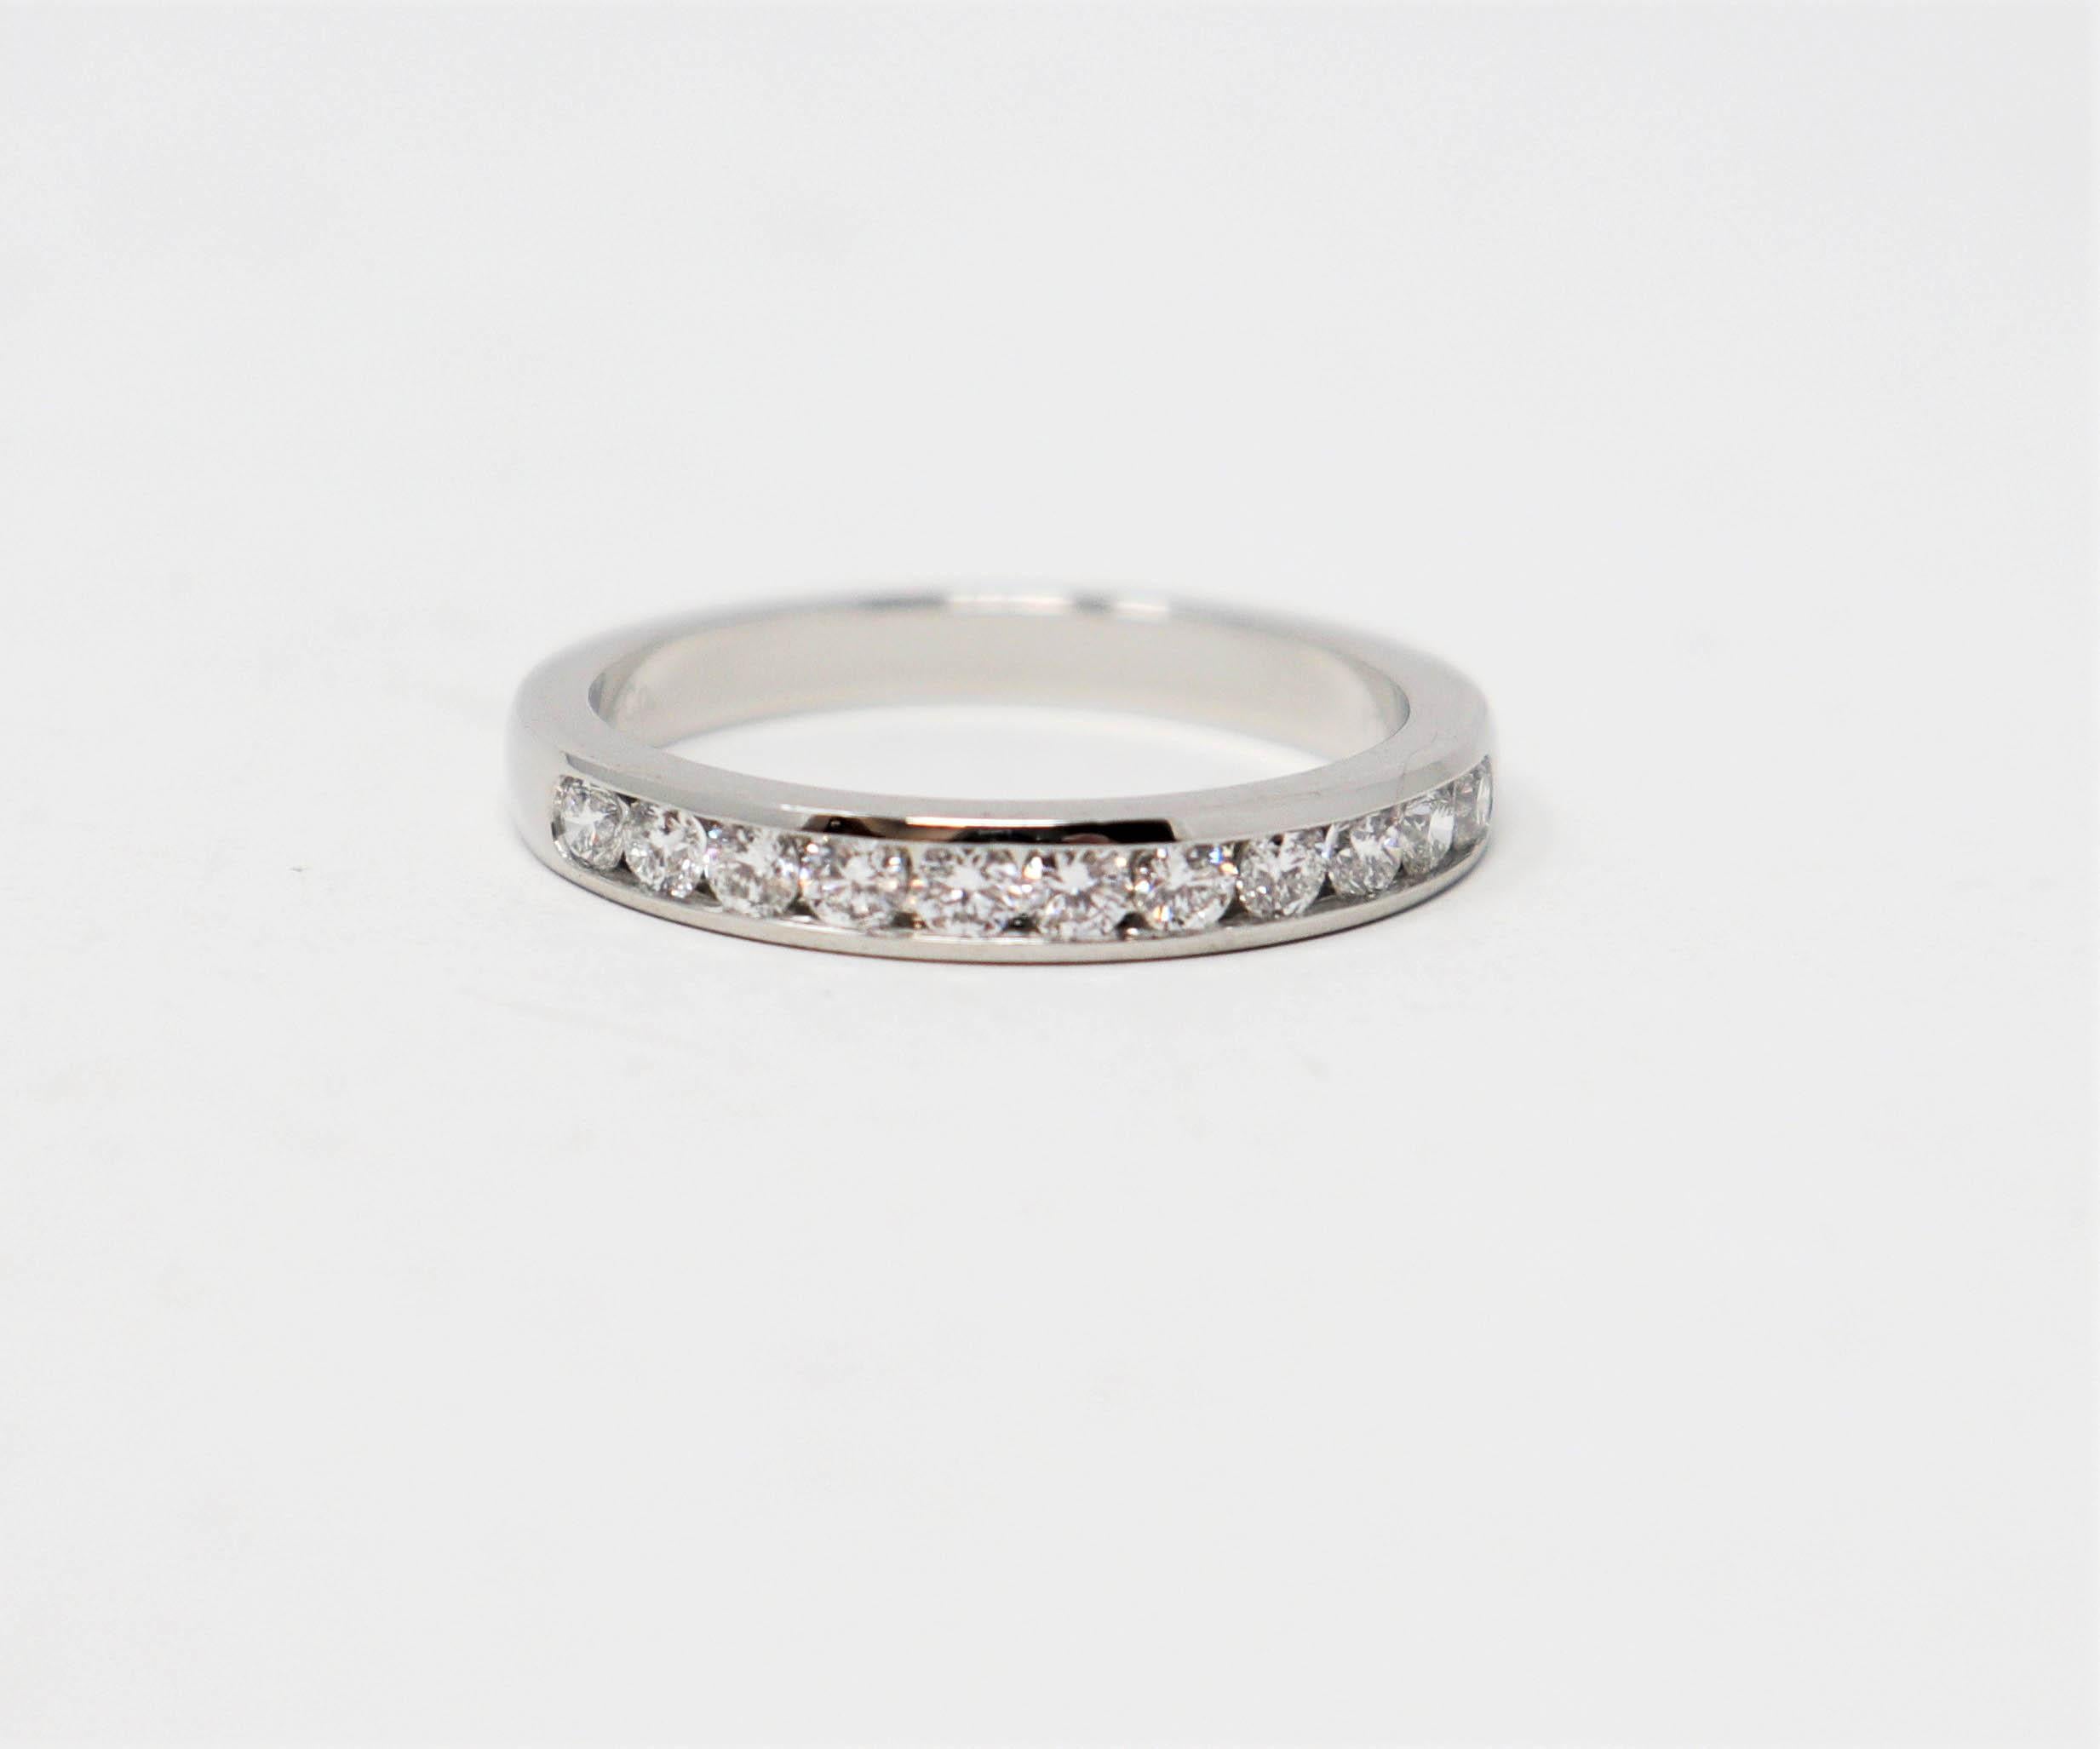 Ring size: 7

Stunning Tiffany & Co. diamond semi eternity band ring. This timeless beauty features icy white round diamonds channel set in a single elegant row. The sleek polished band has a modern, yet feminine feel. It would be perfect paired